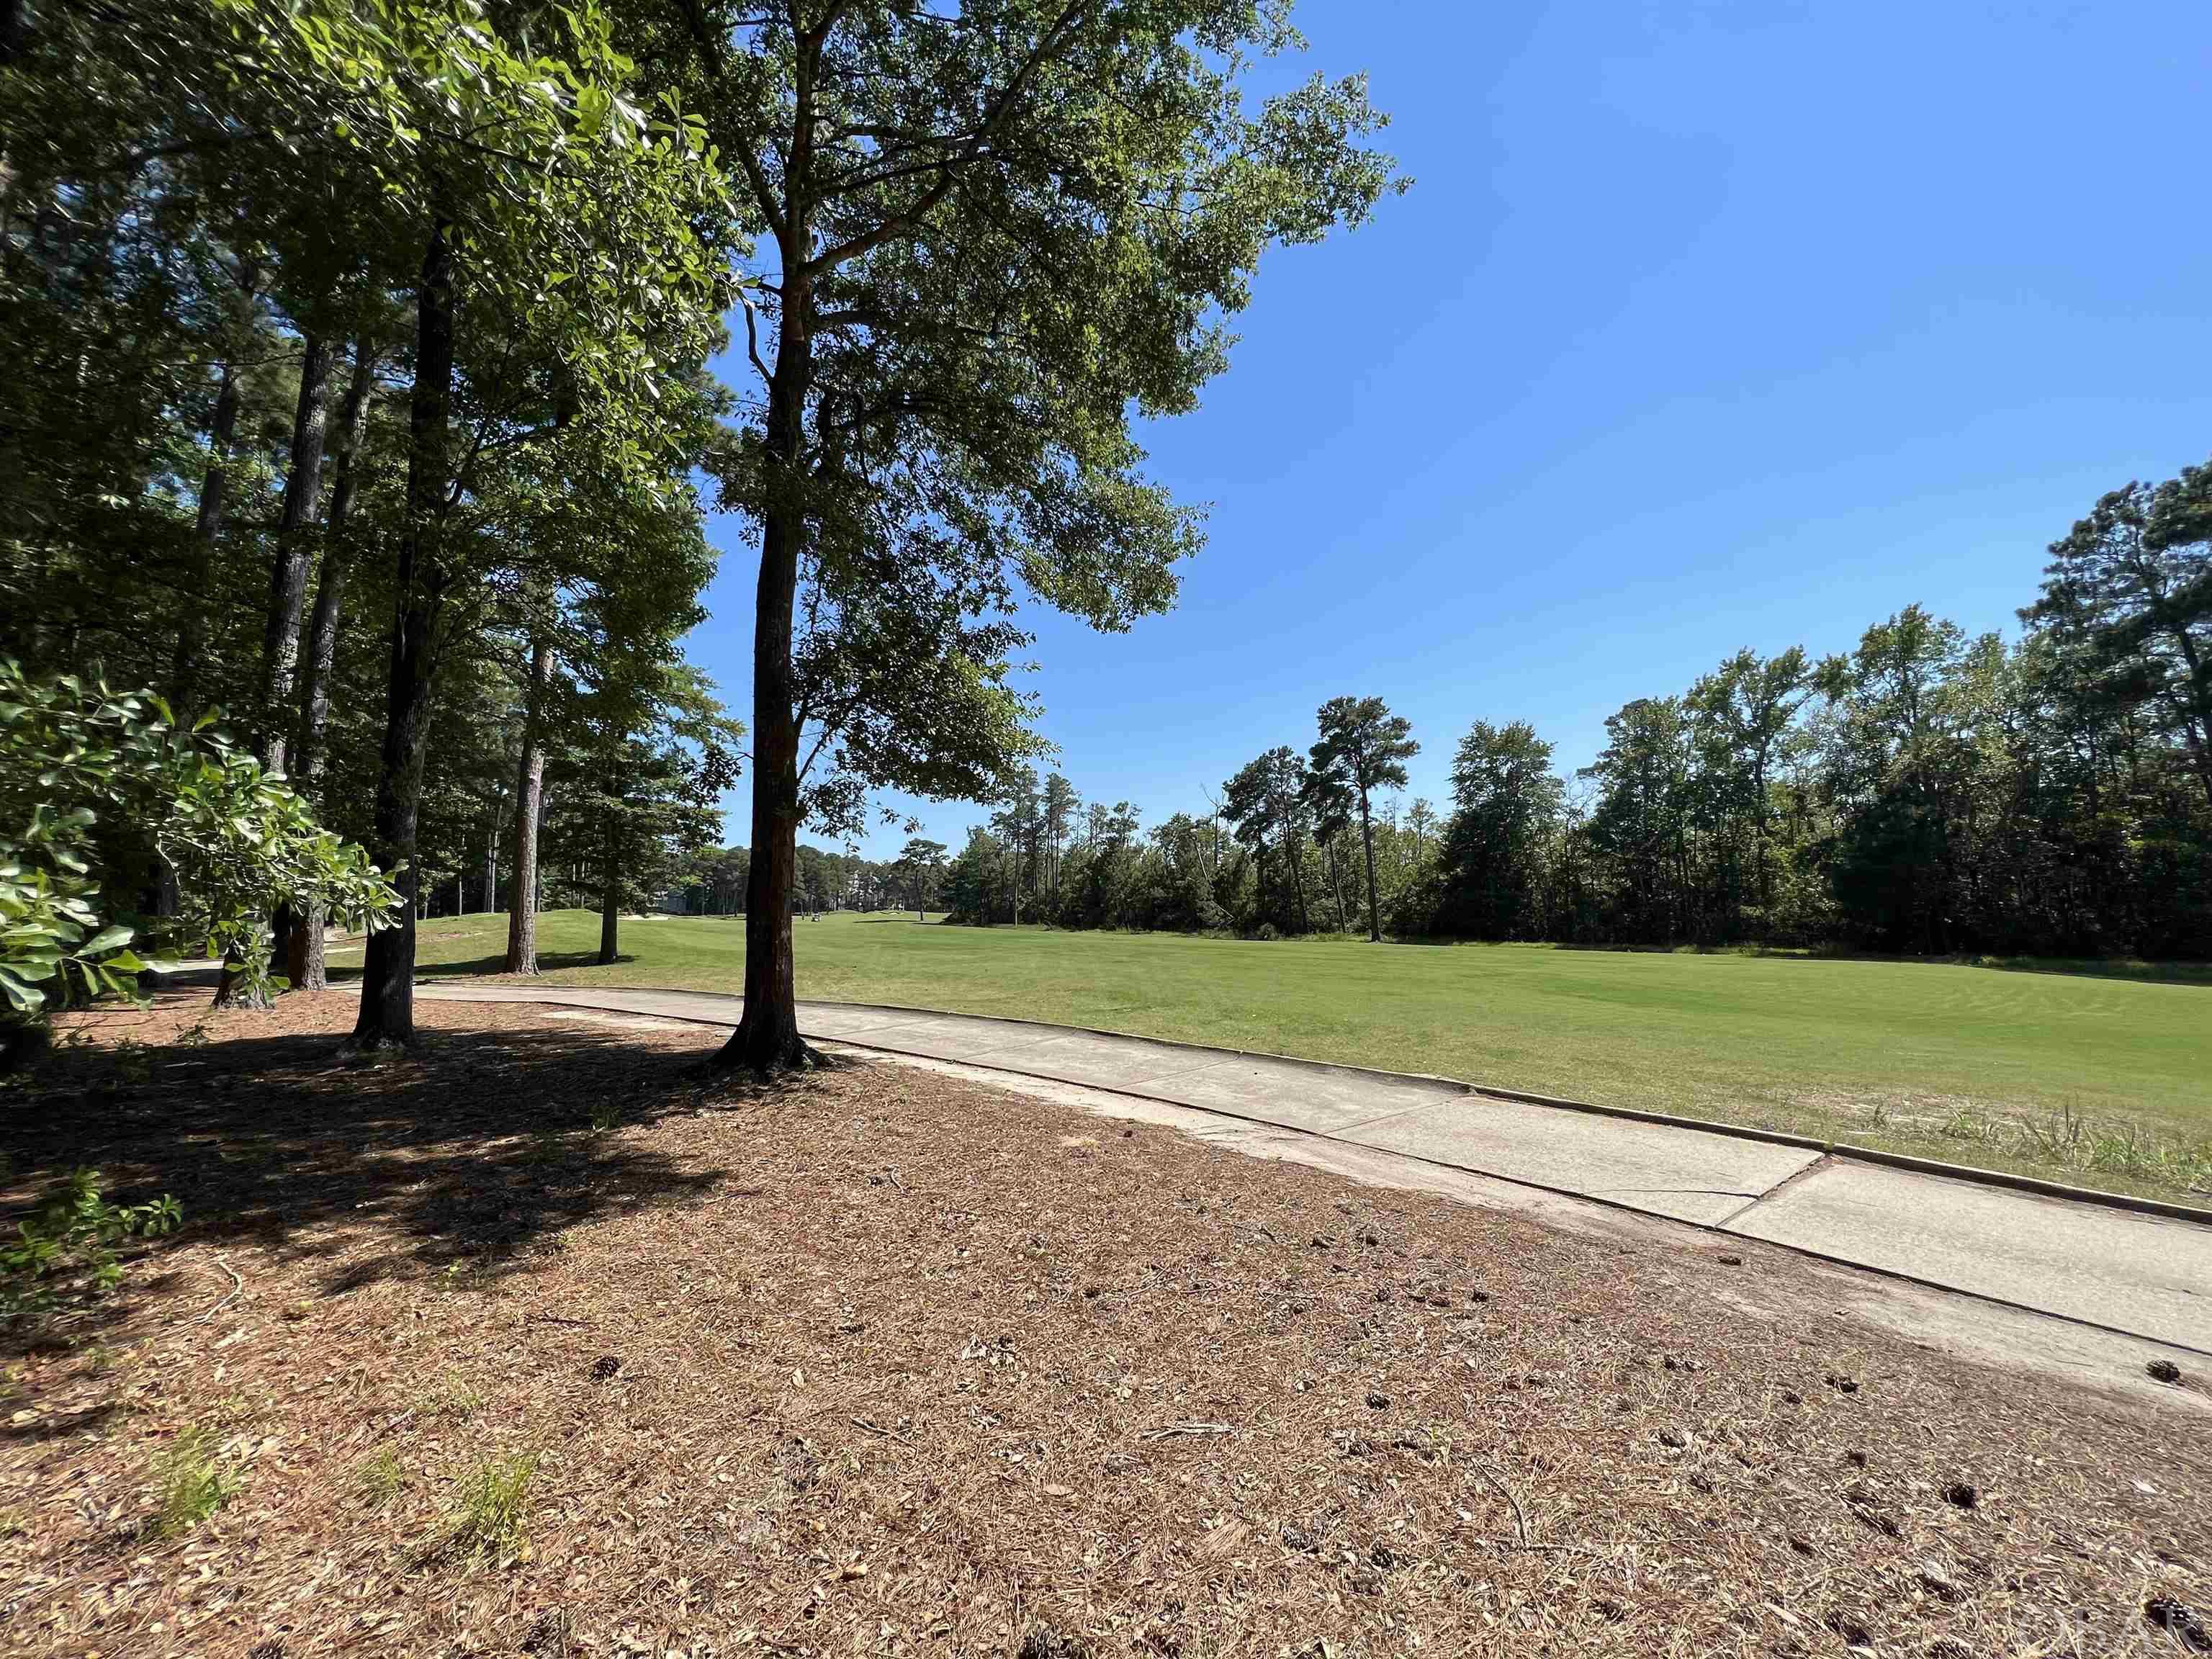 149 Long Point Circle, Powells Point, NC 27966, ,Lots/land,For sale,Long Point Circle,123681